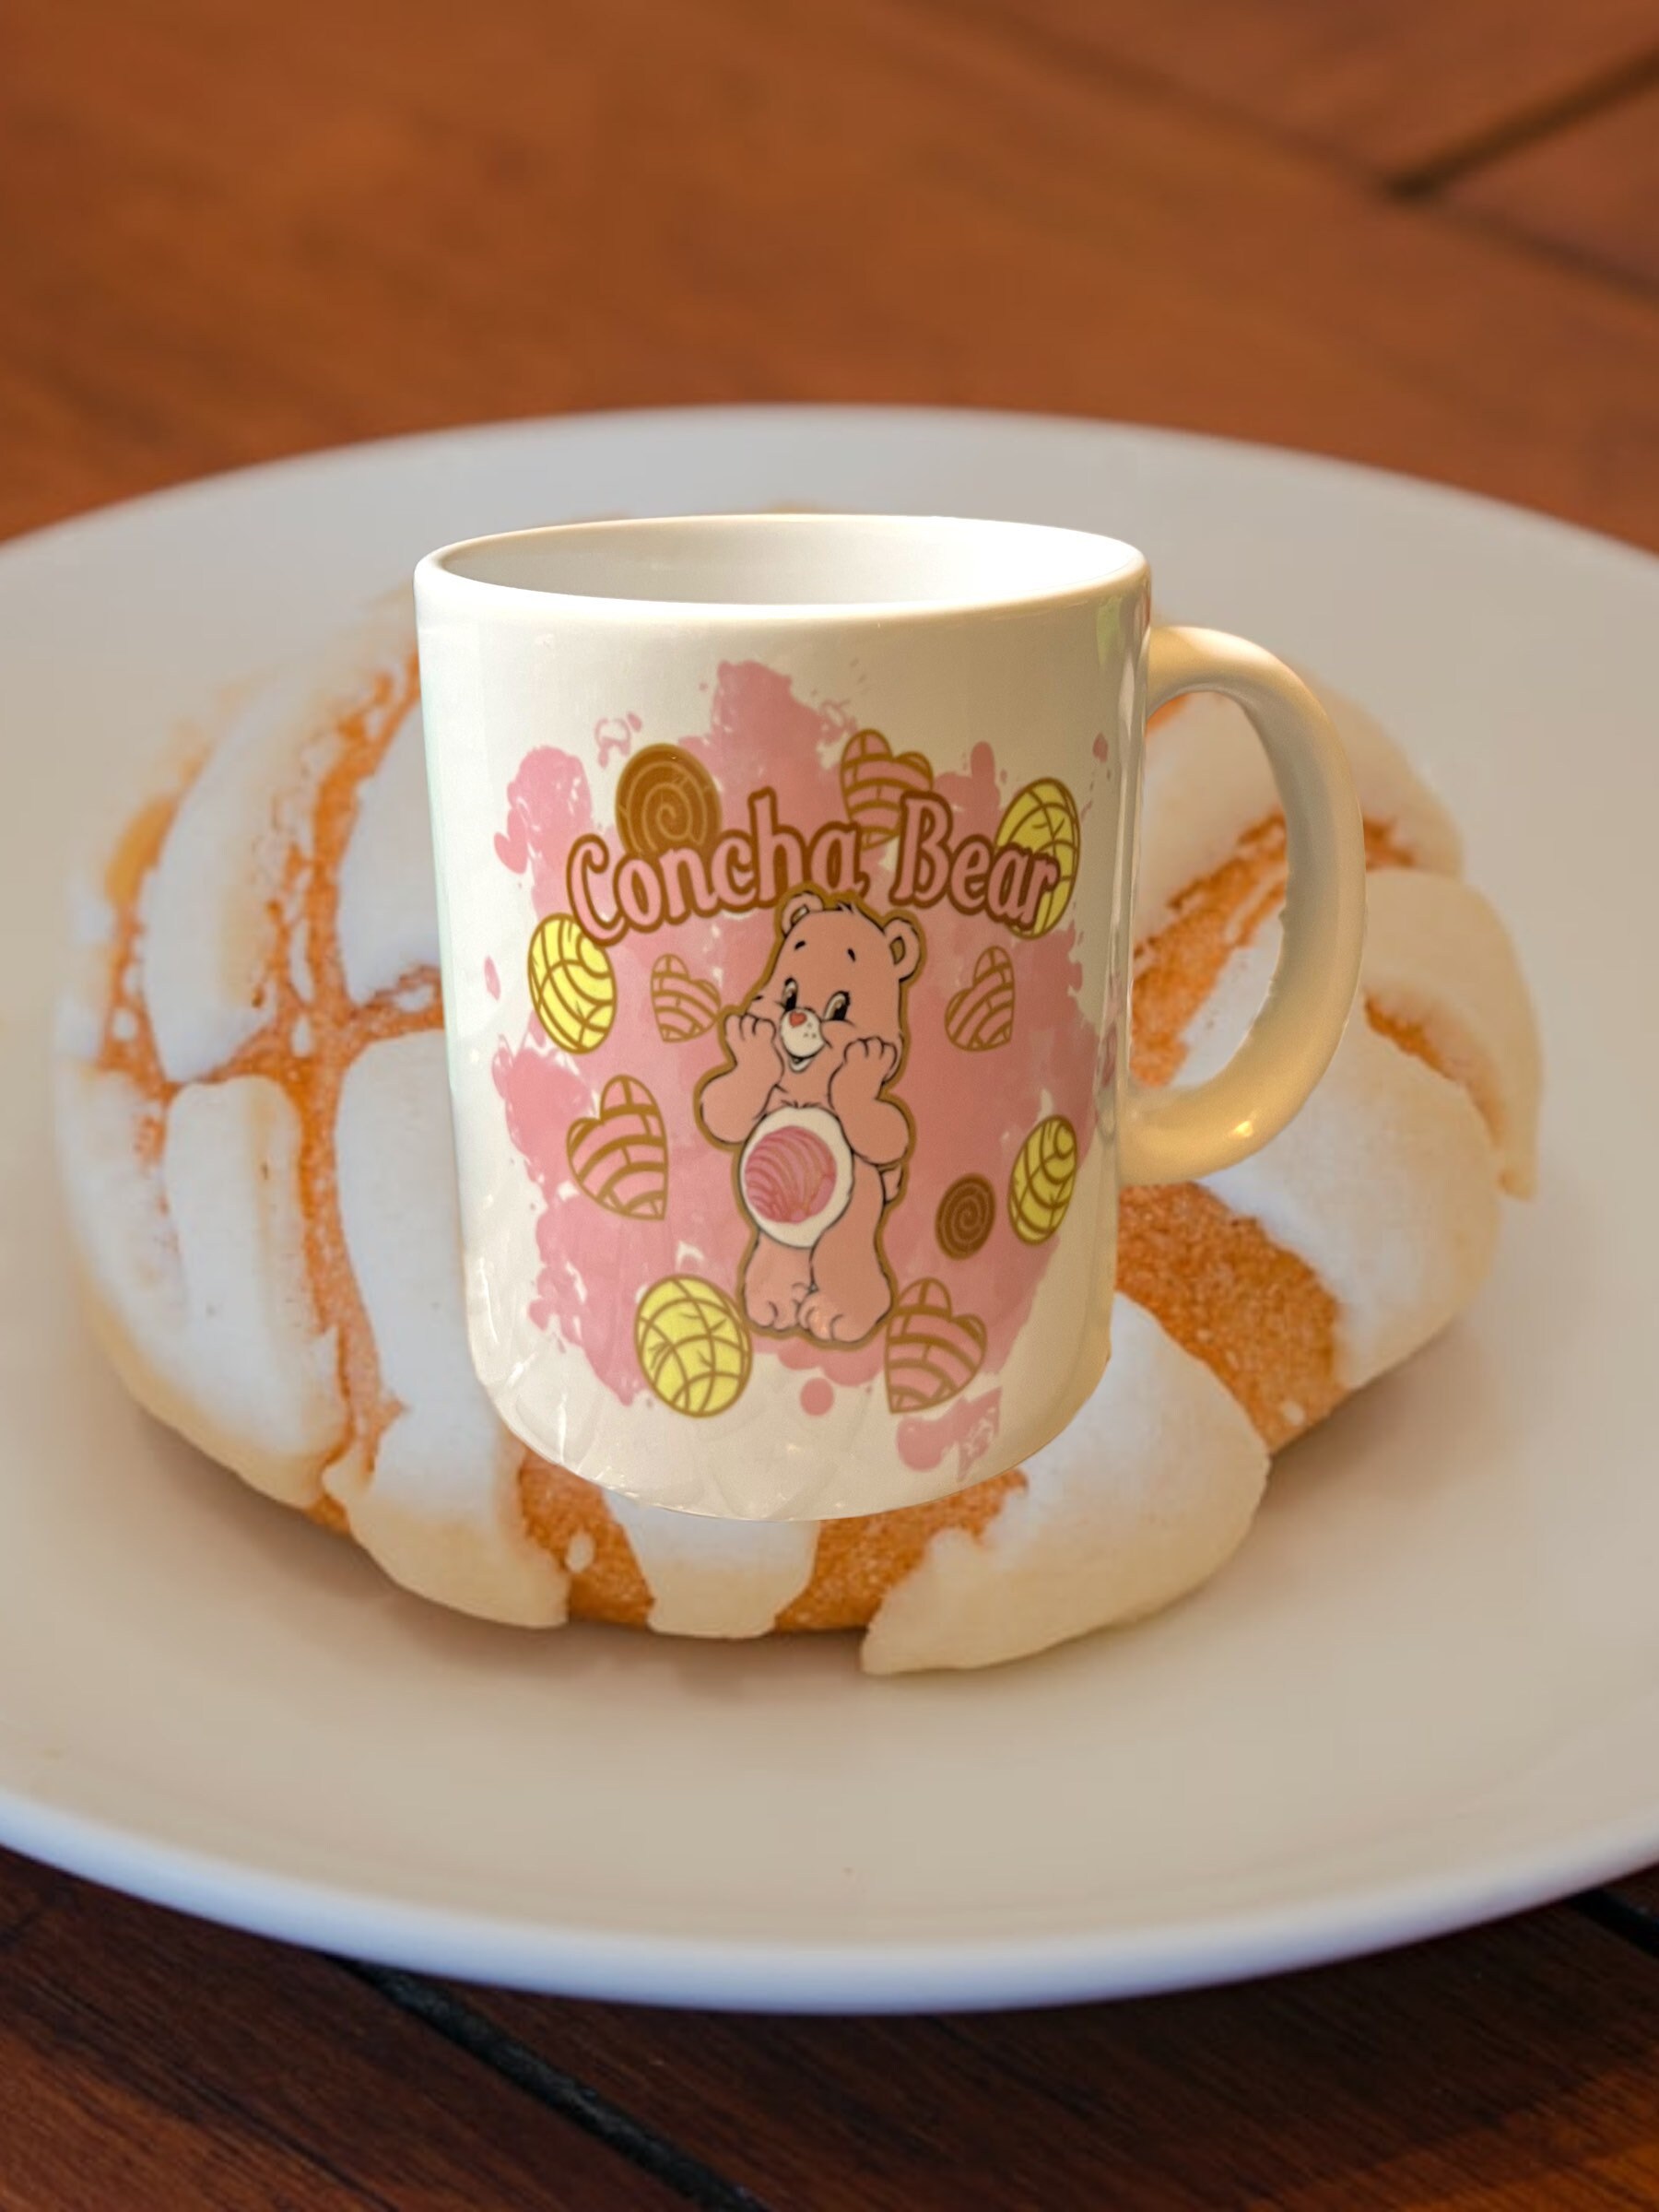 Casitika Conchas Pan Dulce Gifts. Dont Be Self Conchas 11 Oz Cup. Funny  Mexican Concha Mug. Gift Ide…See more Casitika Conchas Pan Dulce Gifts.  Dont